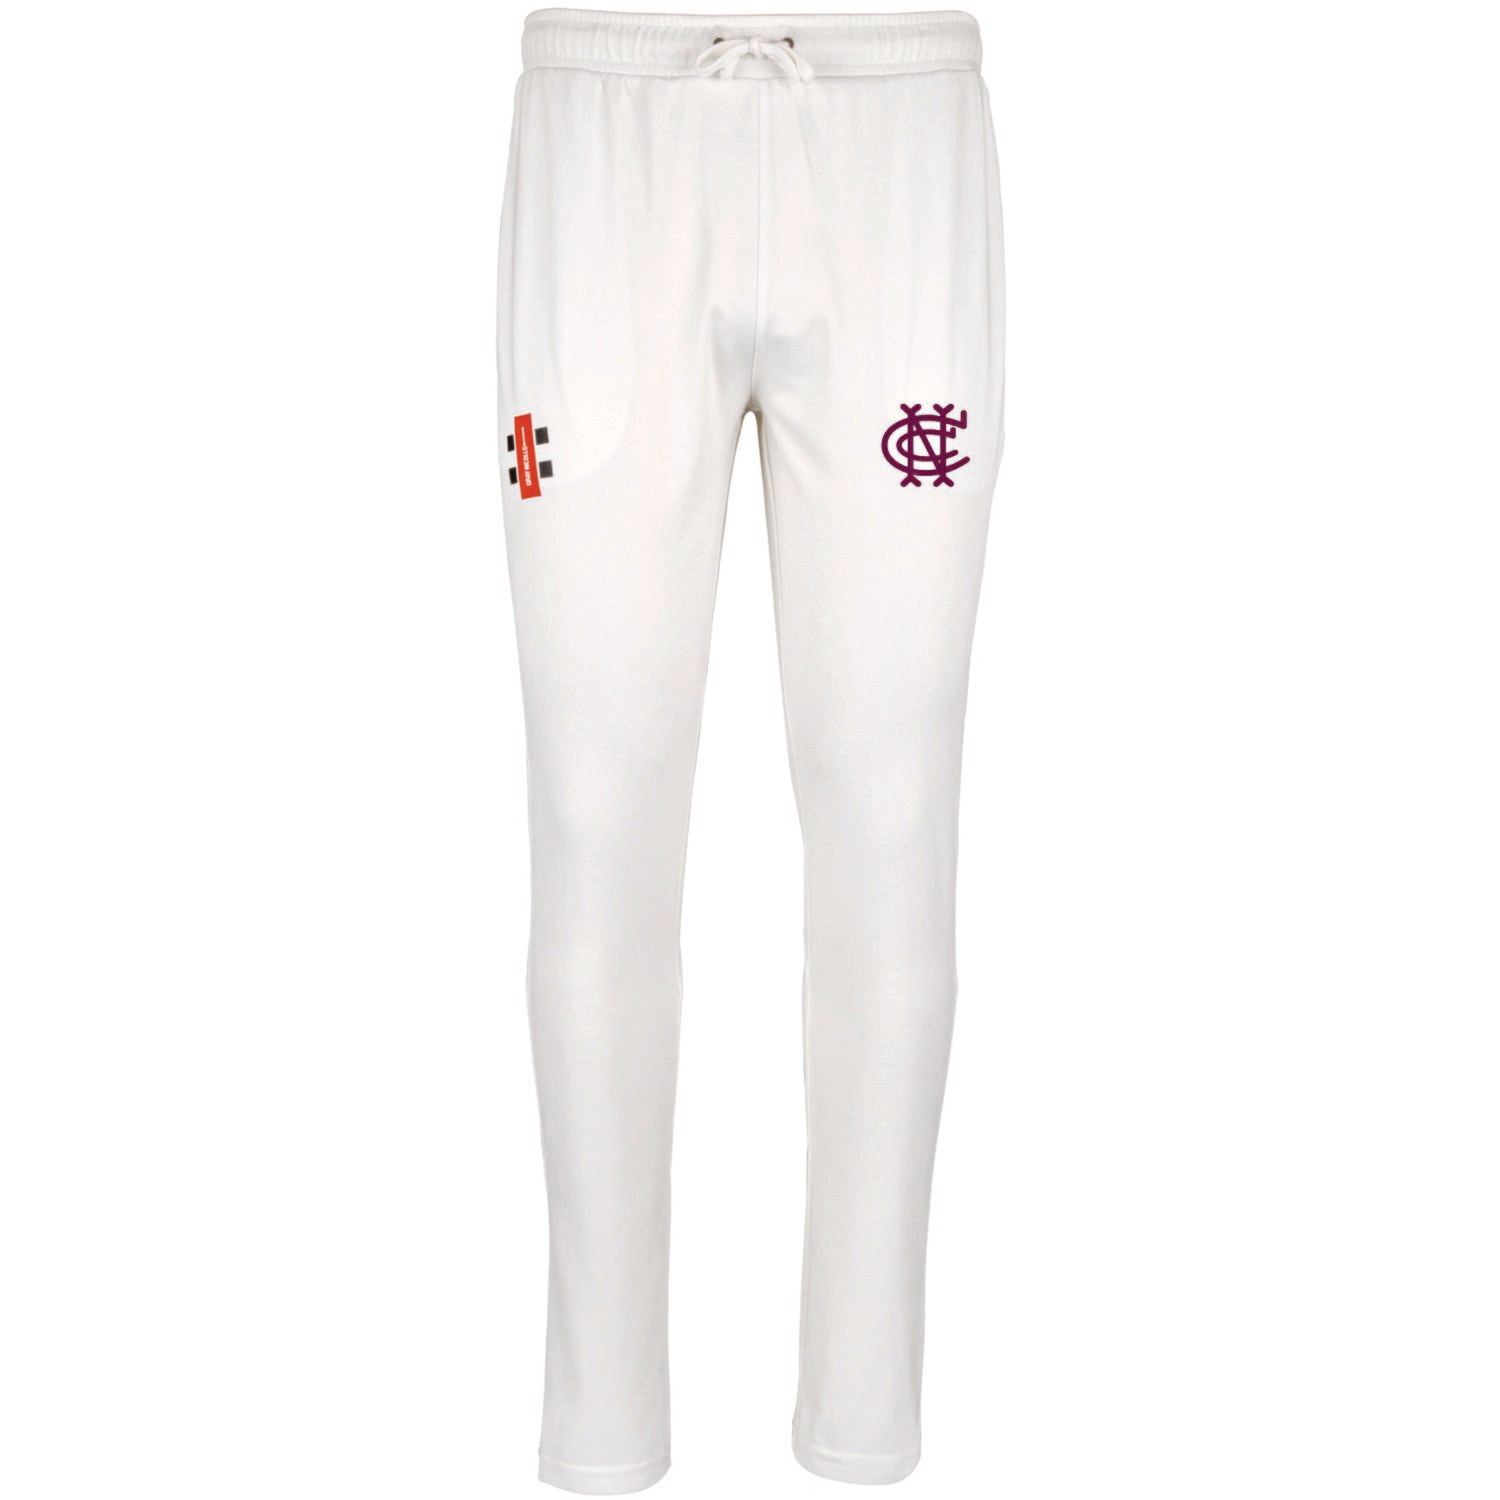 Newport Pro Performance Cricket Trousers Adult